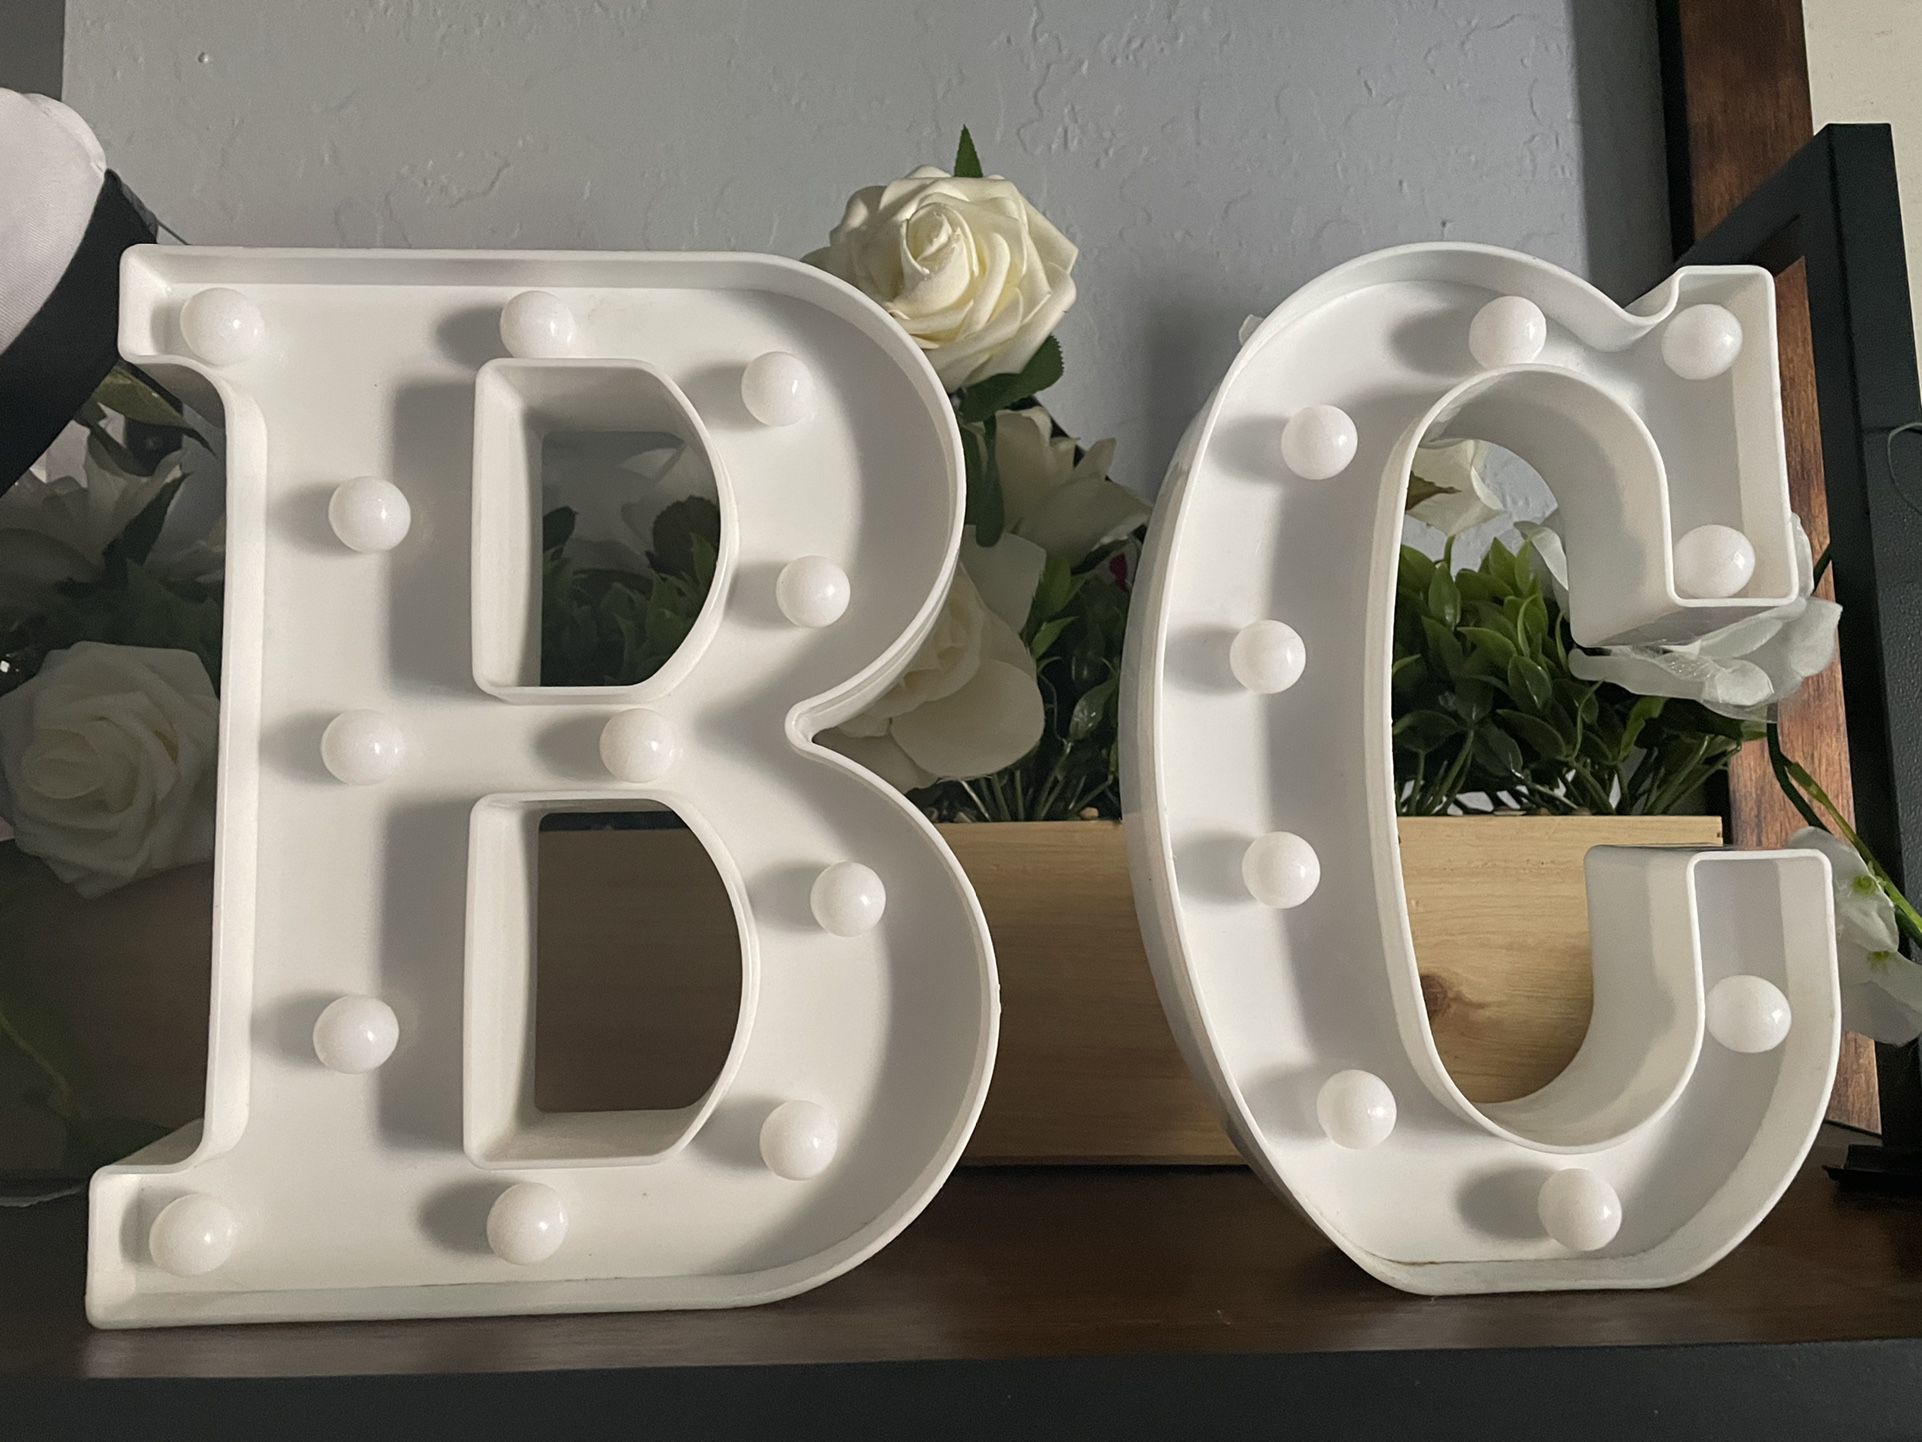 "B" And "C" Marquee Lights 